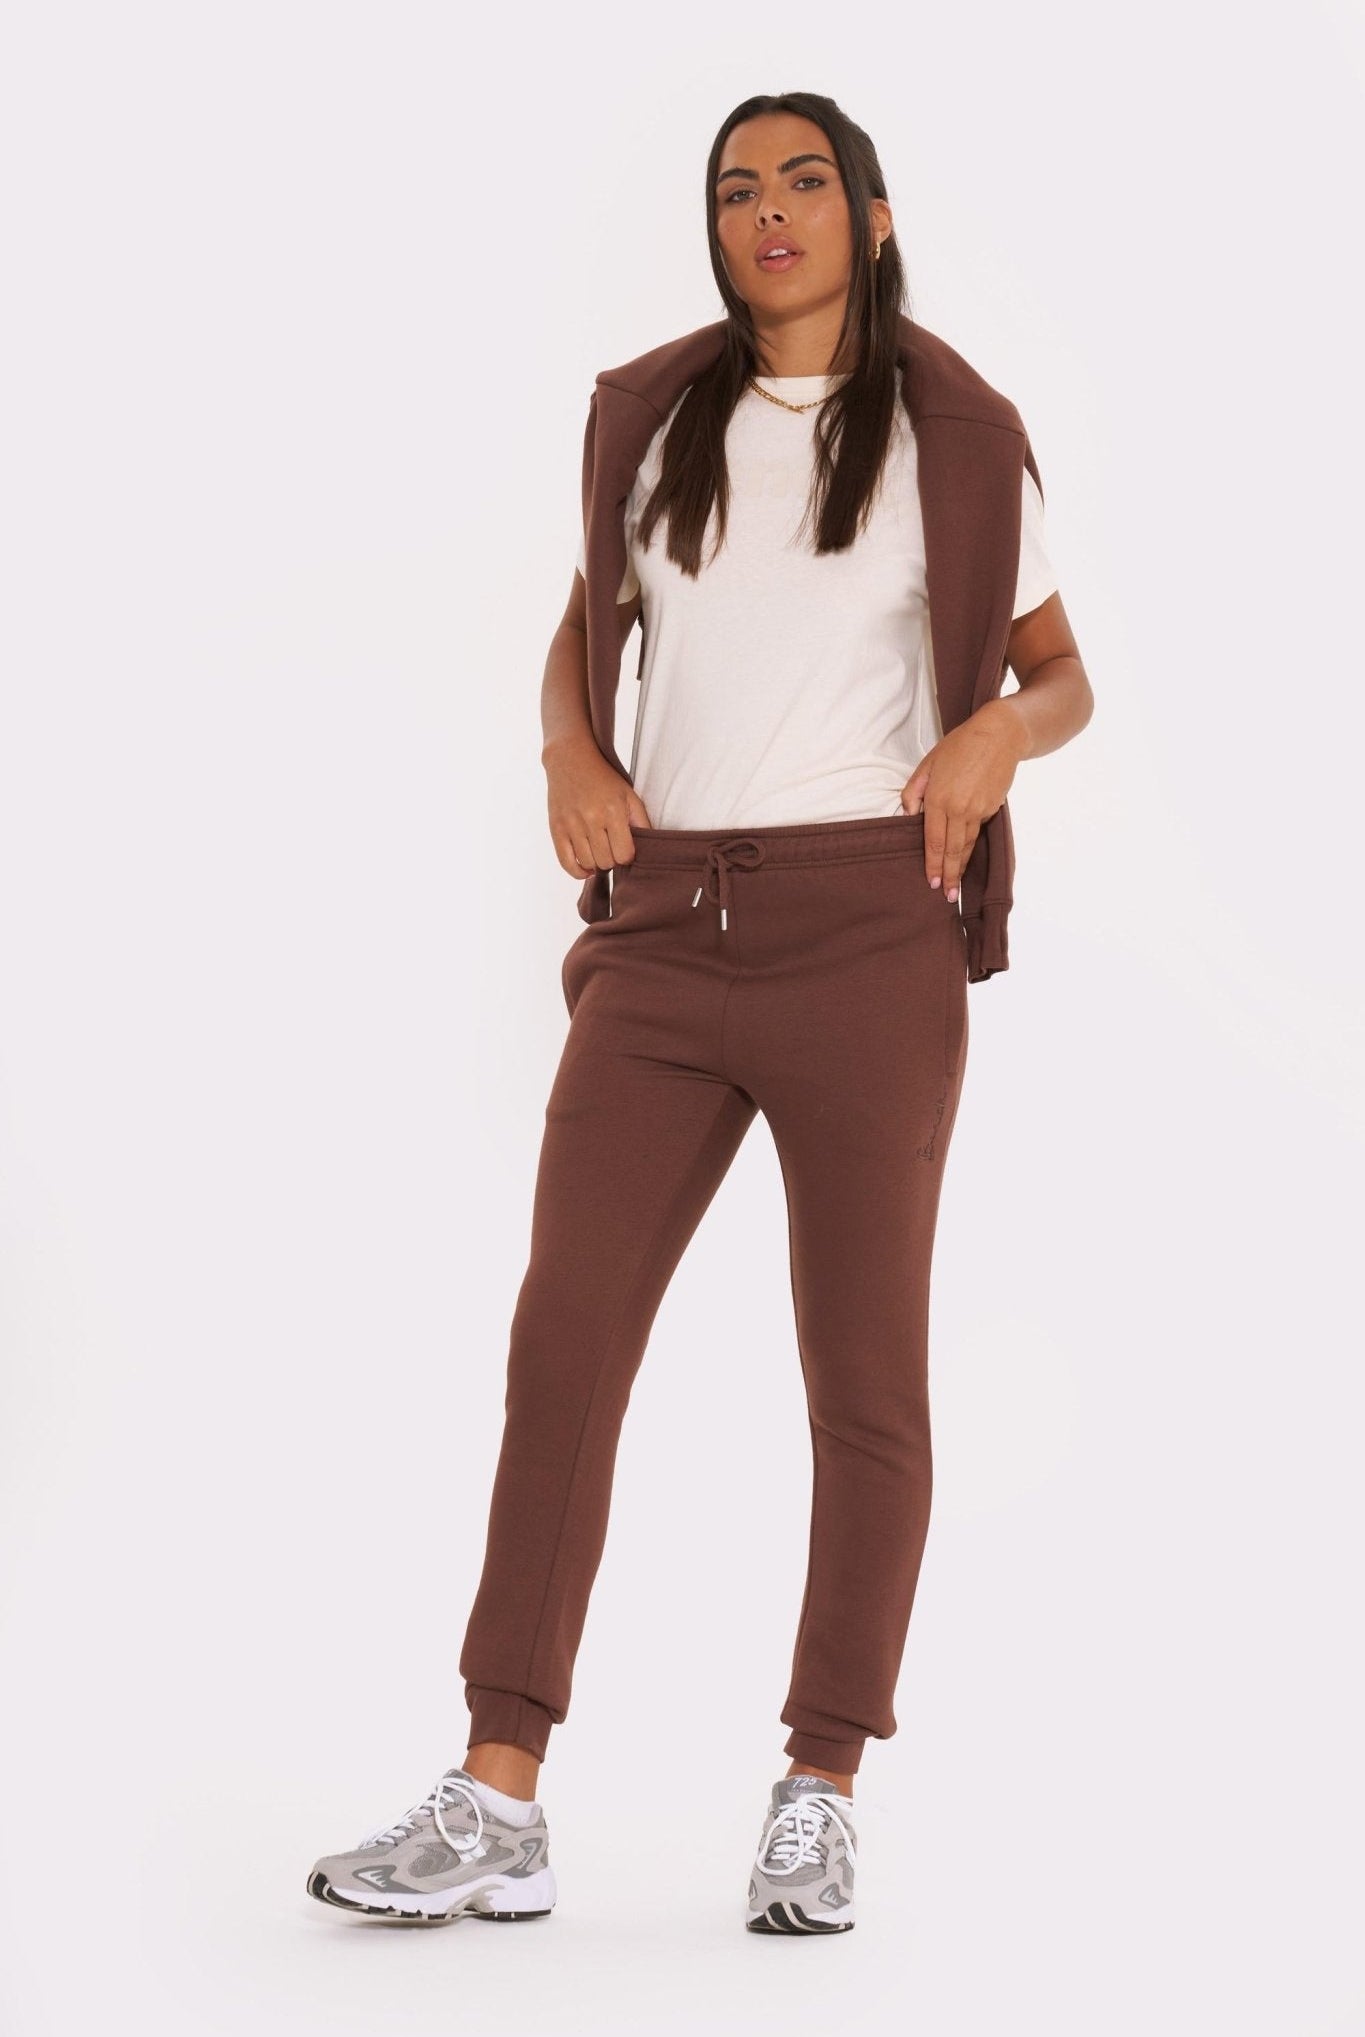 The Essential Joggers - Womens – Humble APPAREL